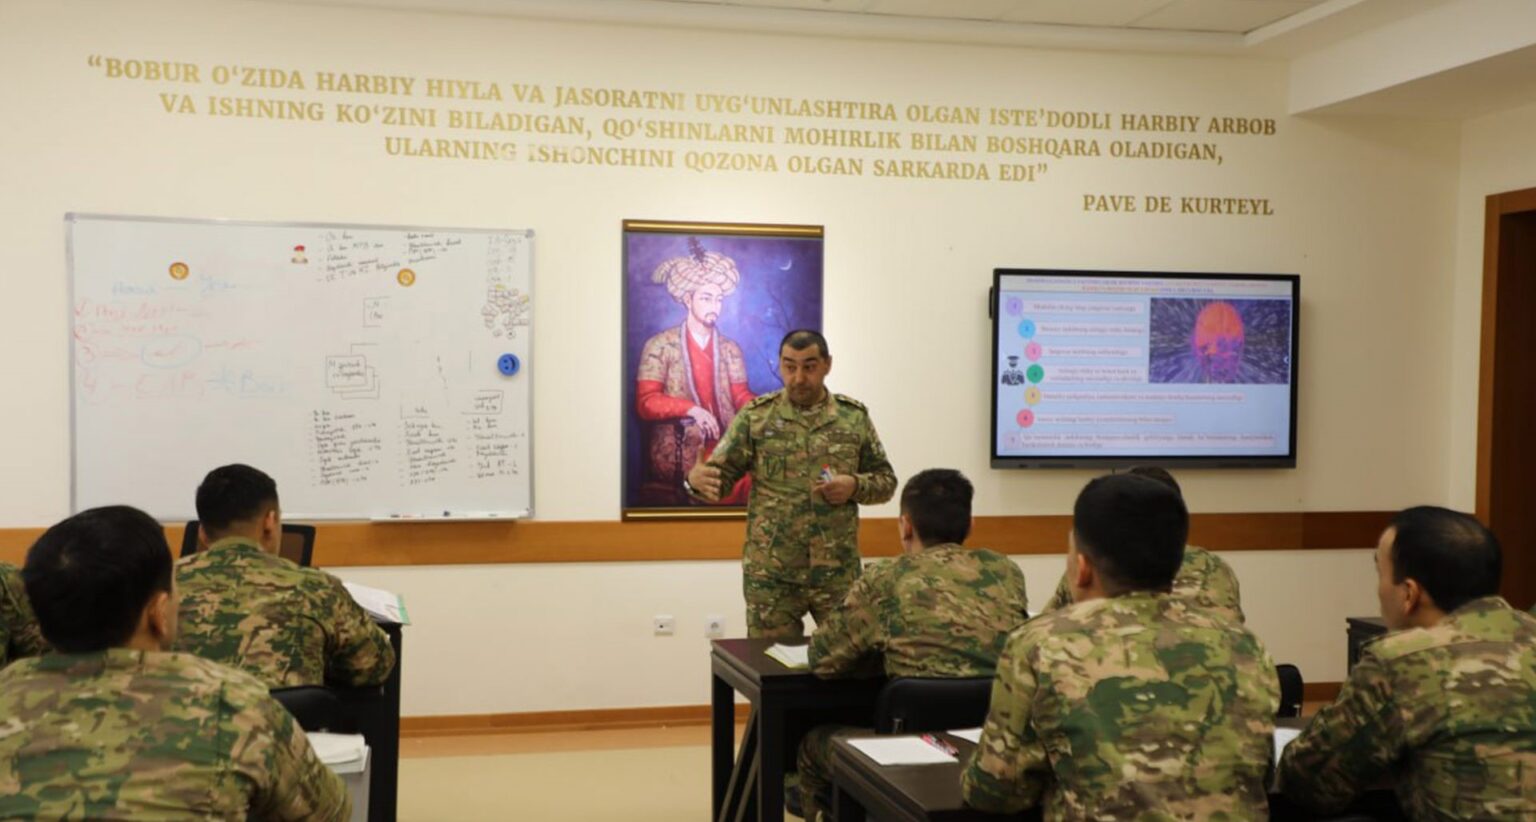 For the officers “Master class” was organized at the academy